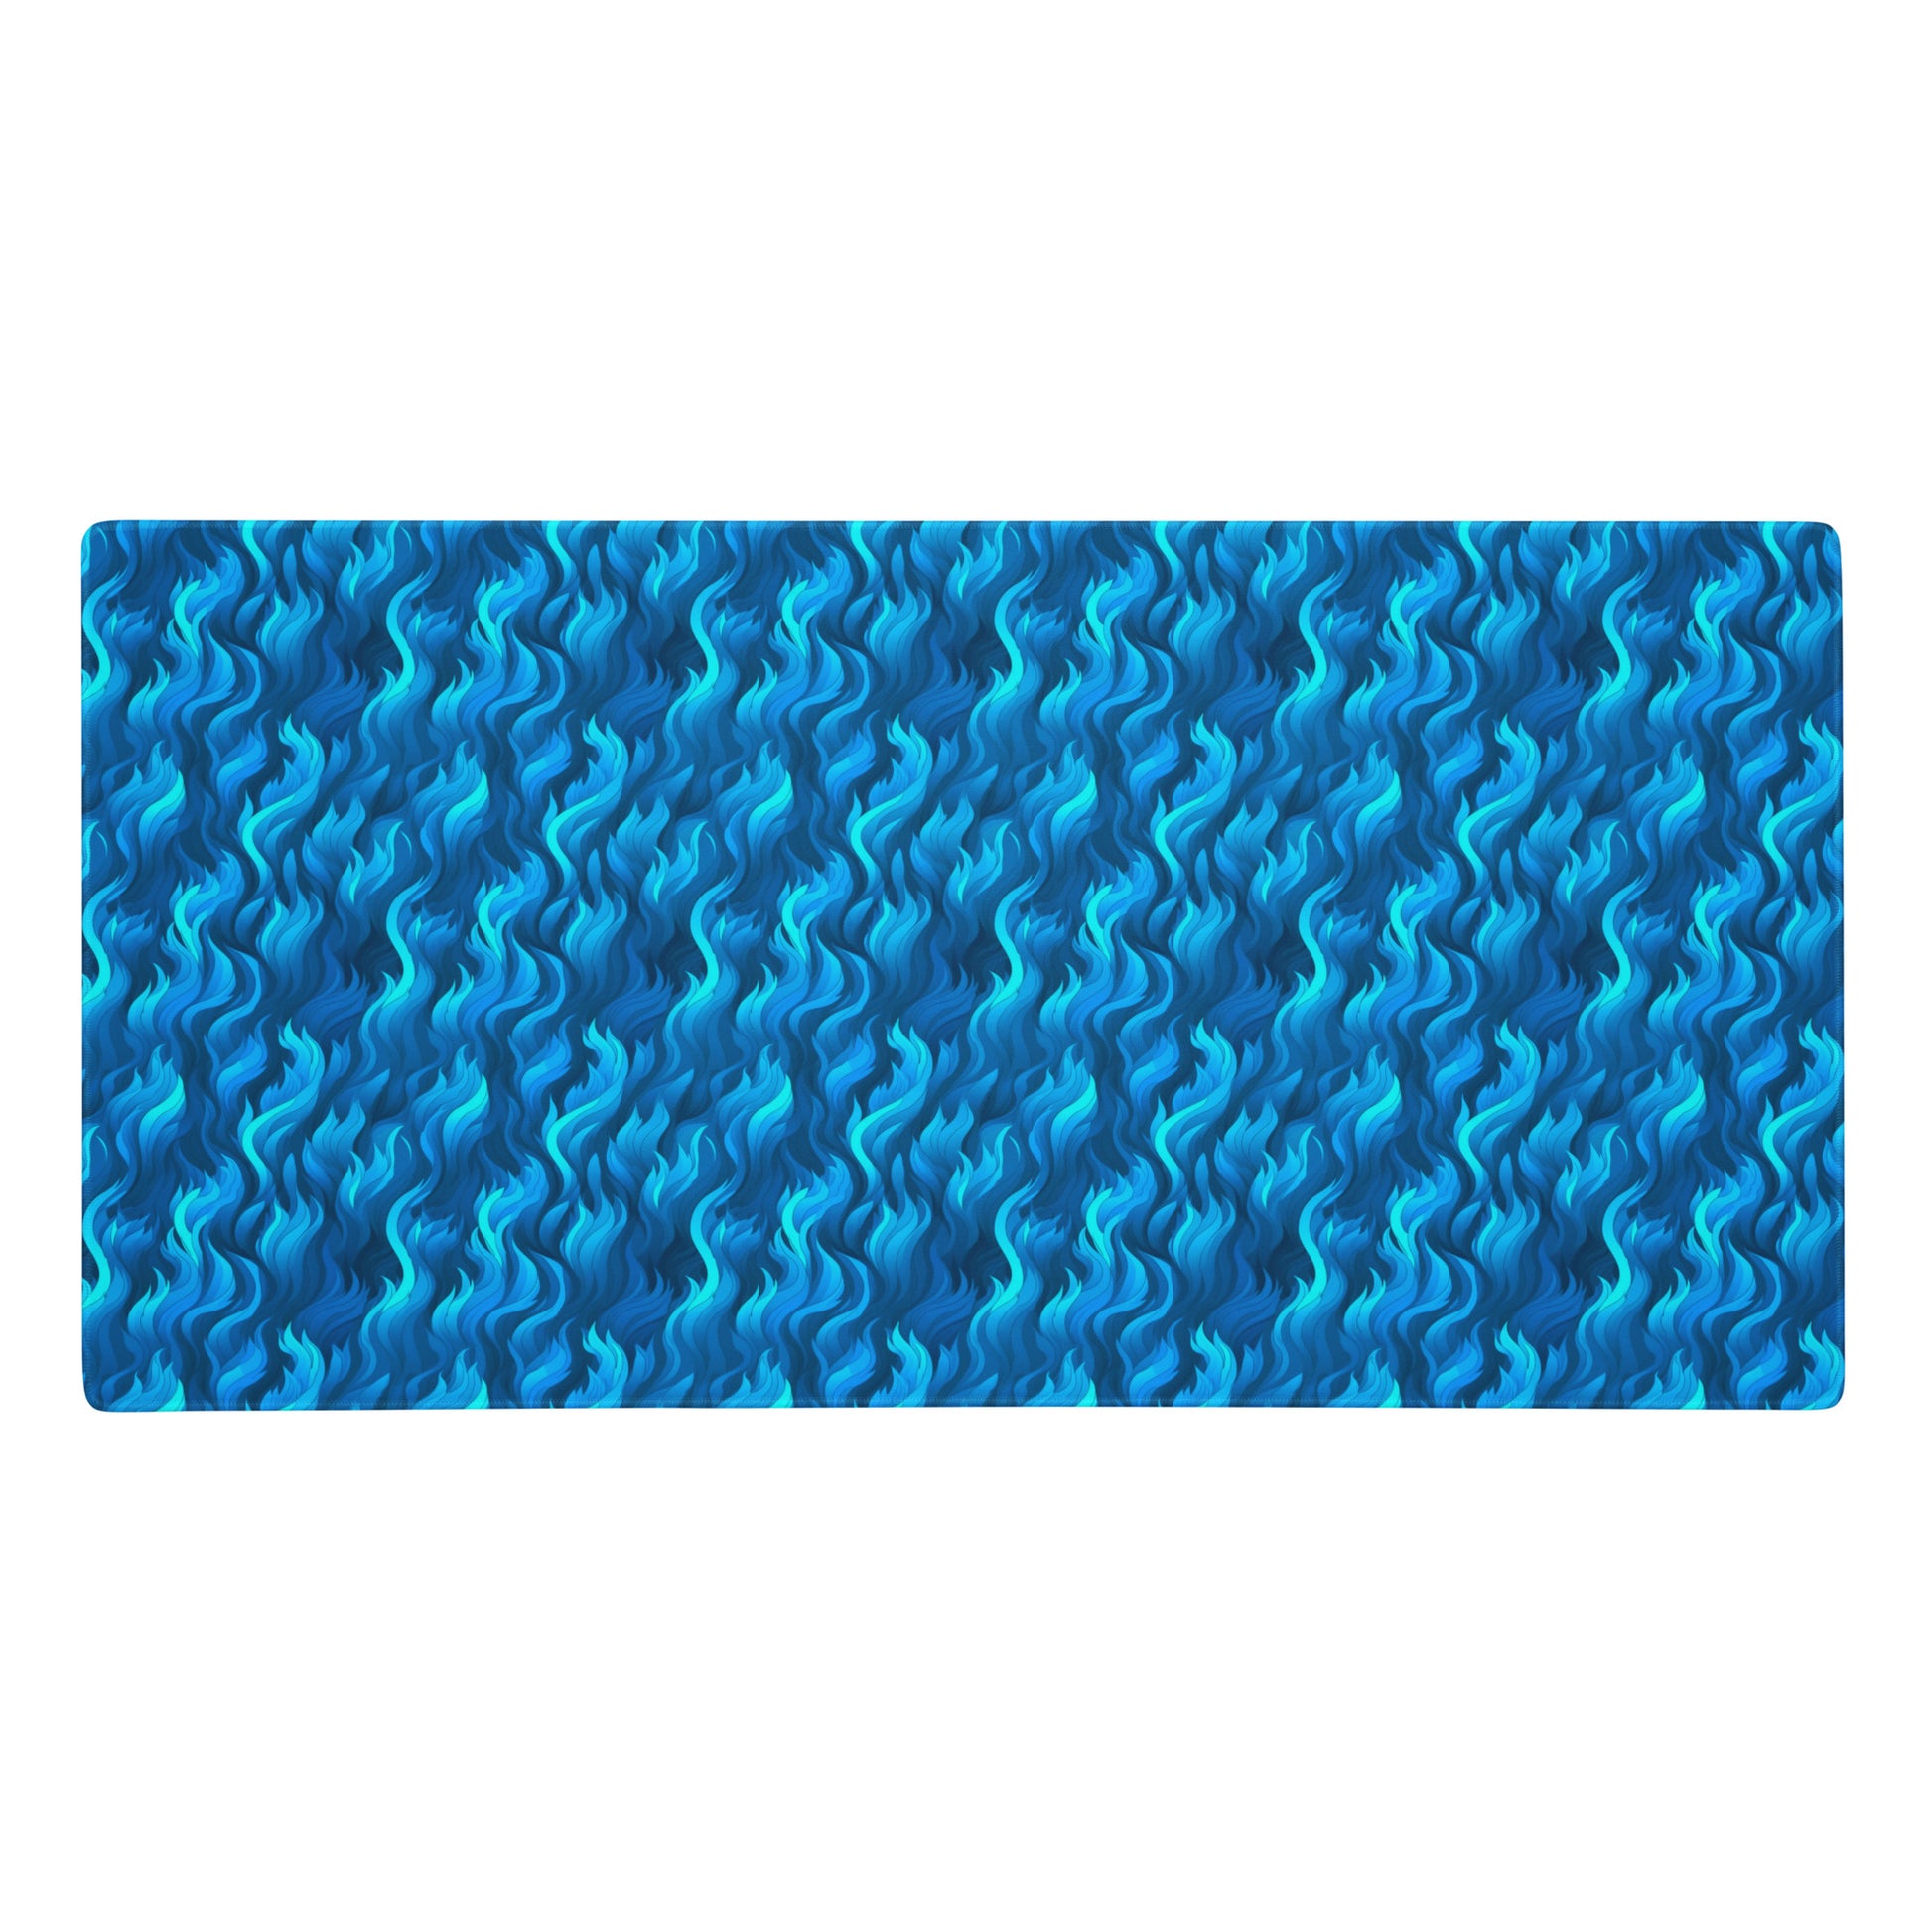 A 36" x 18" desk pad with a wavy flame pattern on it. Blue in color.